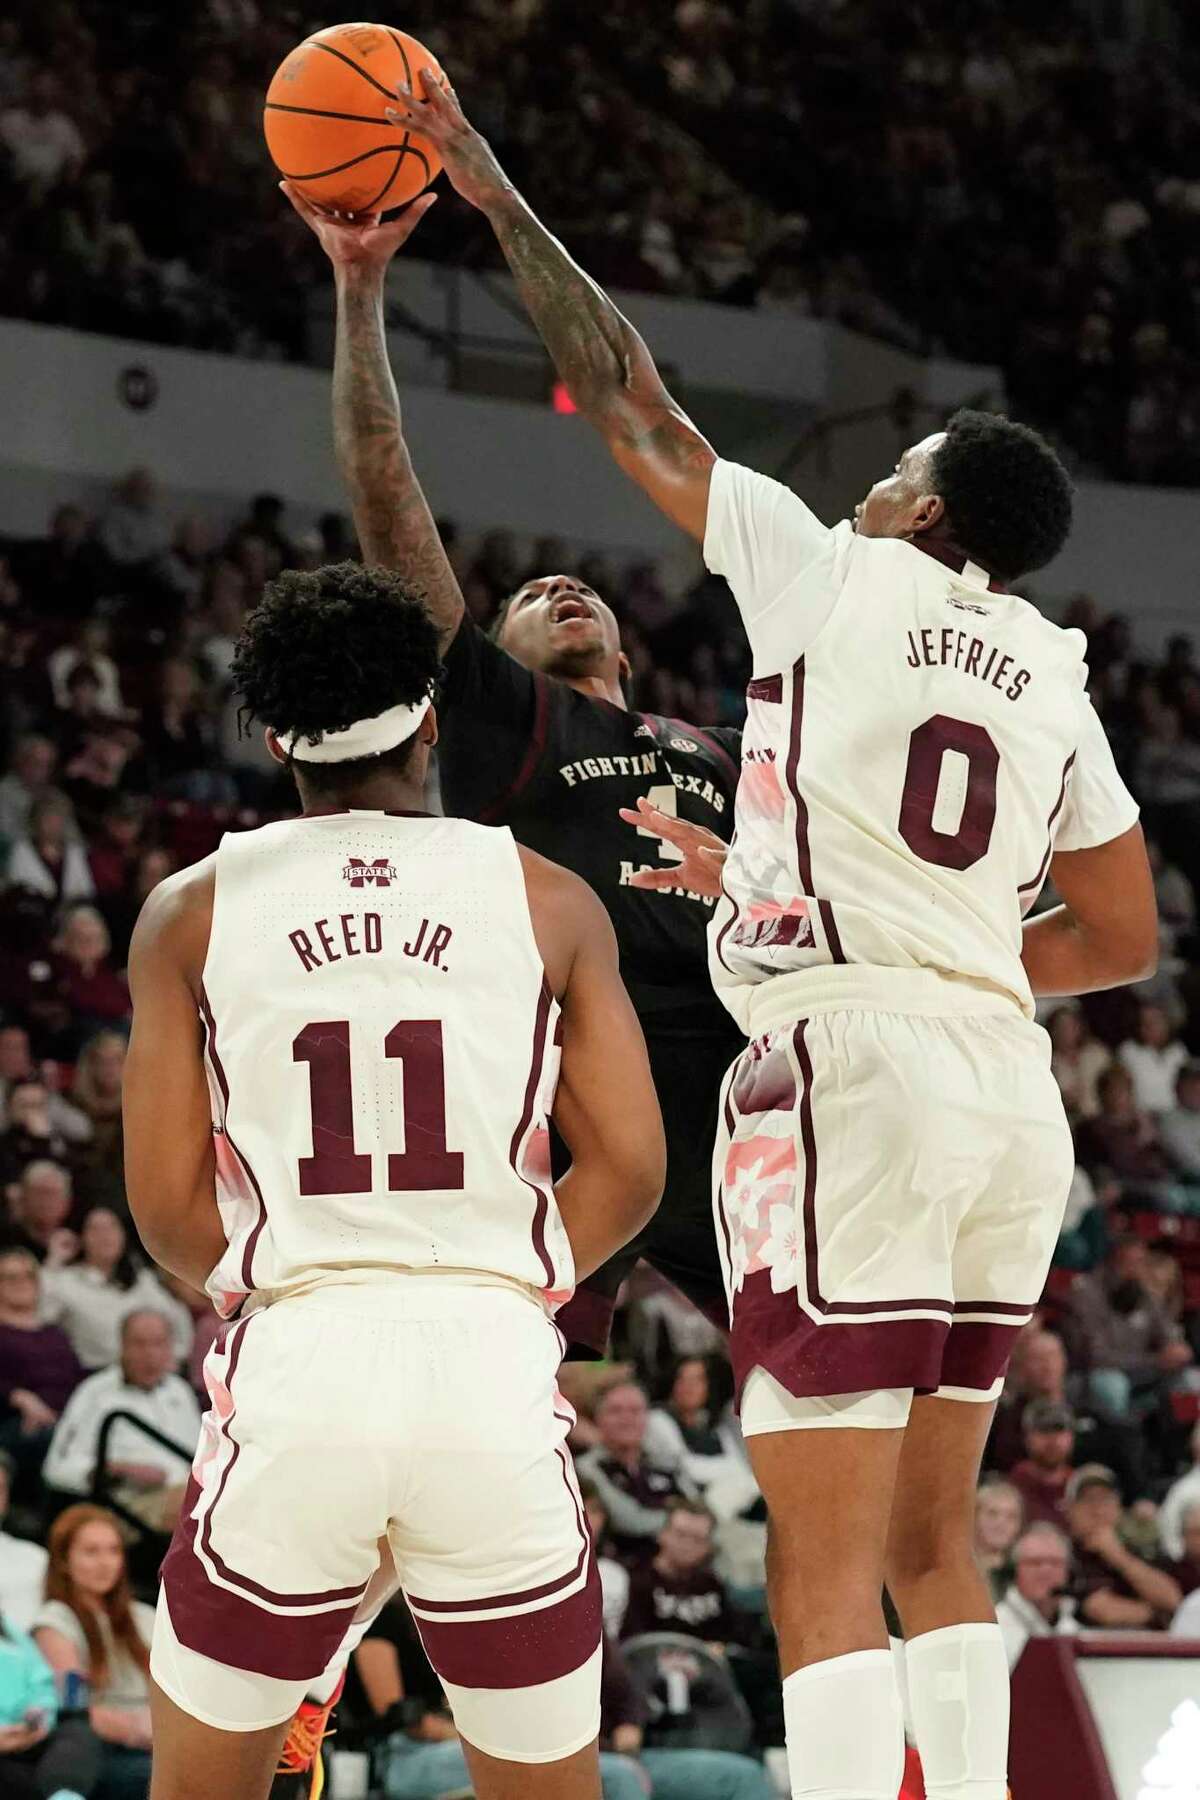 Texas A&M guard Wade Taylor IV (4) has his shot blocked by Mississippi State forward D.J. Jeffries (0) during the first half of an NCAA college basketball game in Starkville, Miss., Saturday, Feb. 25, 2023. (AP Photo/Rogelio V. Solis)